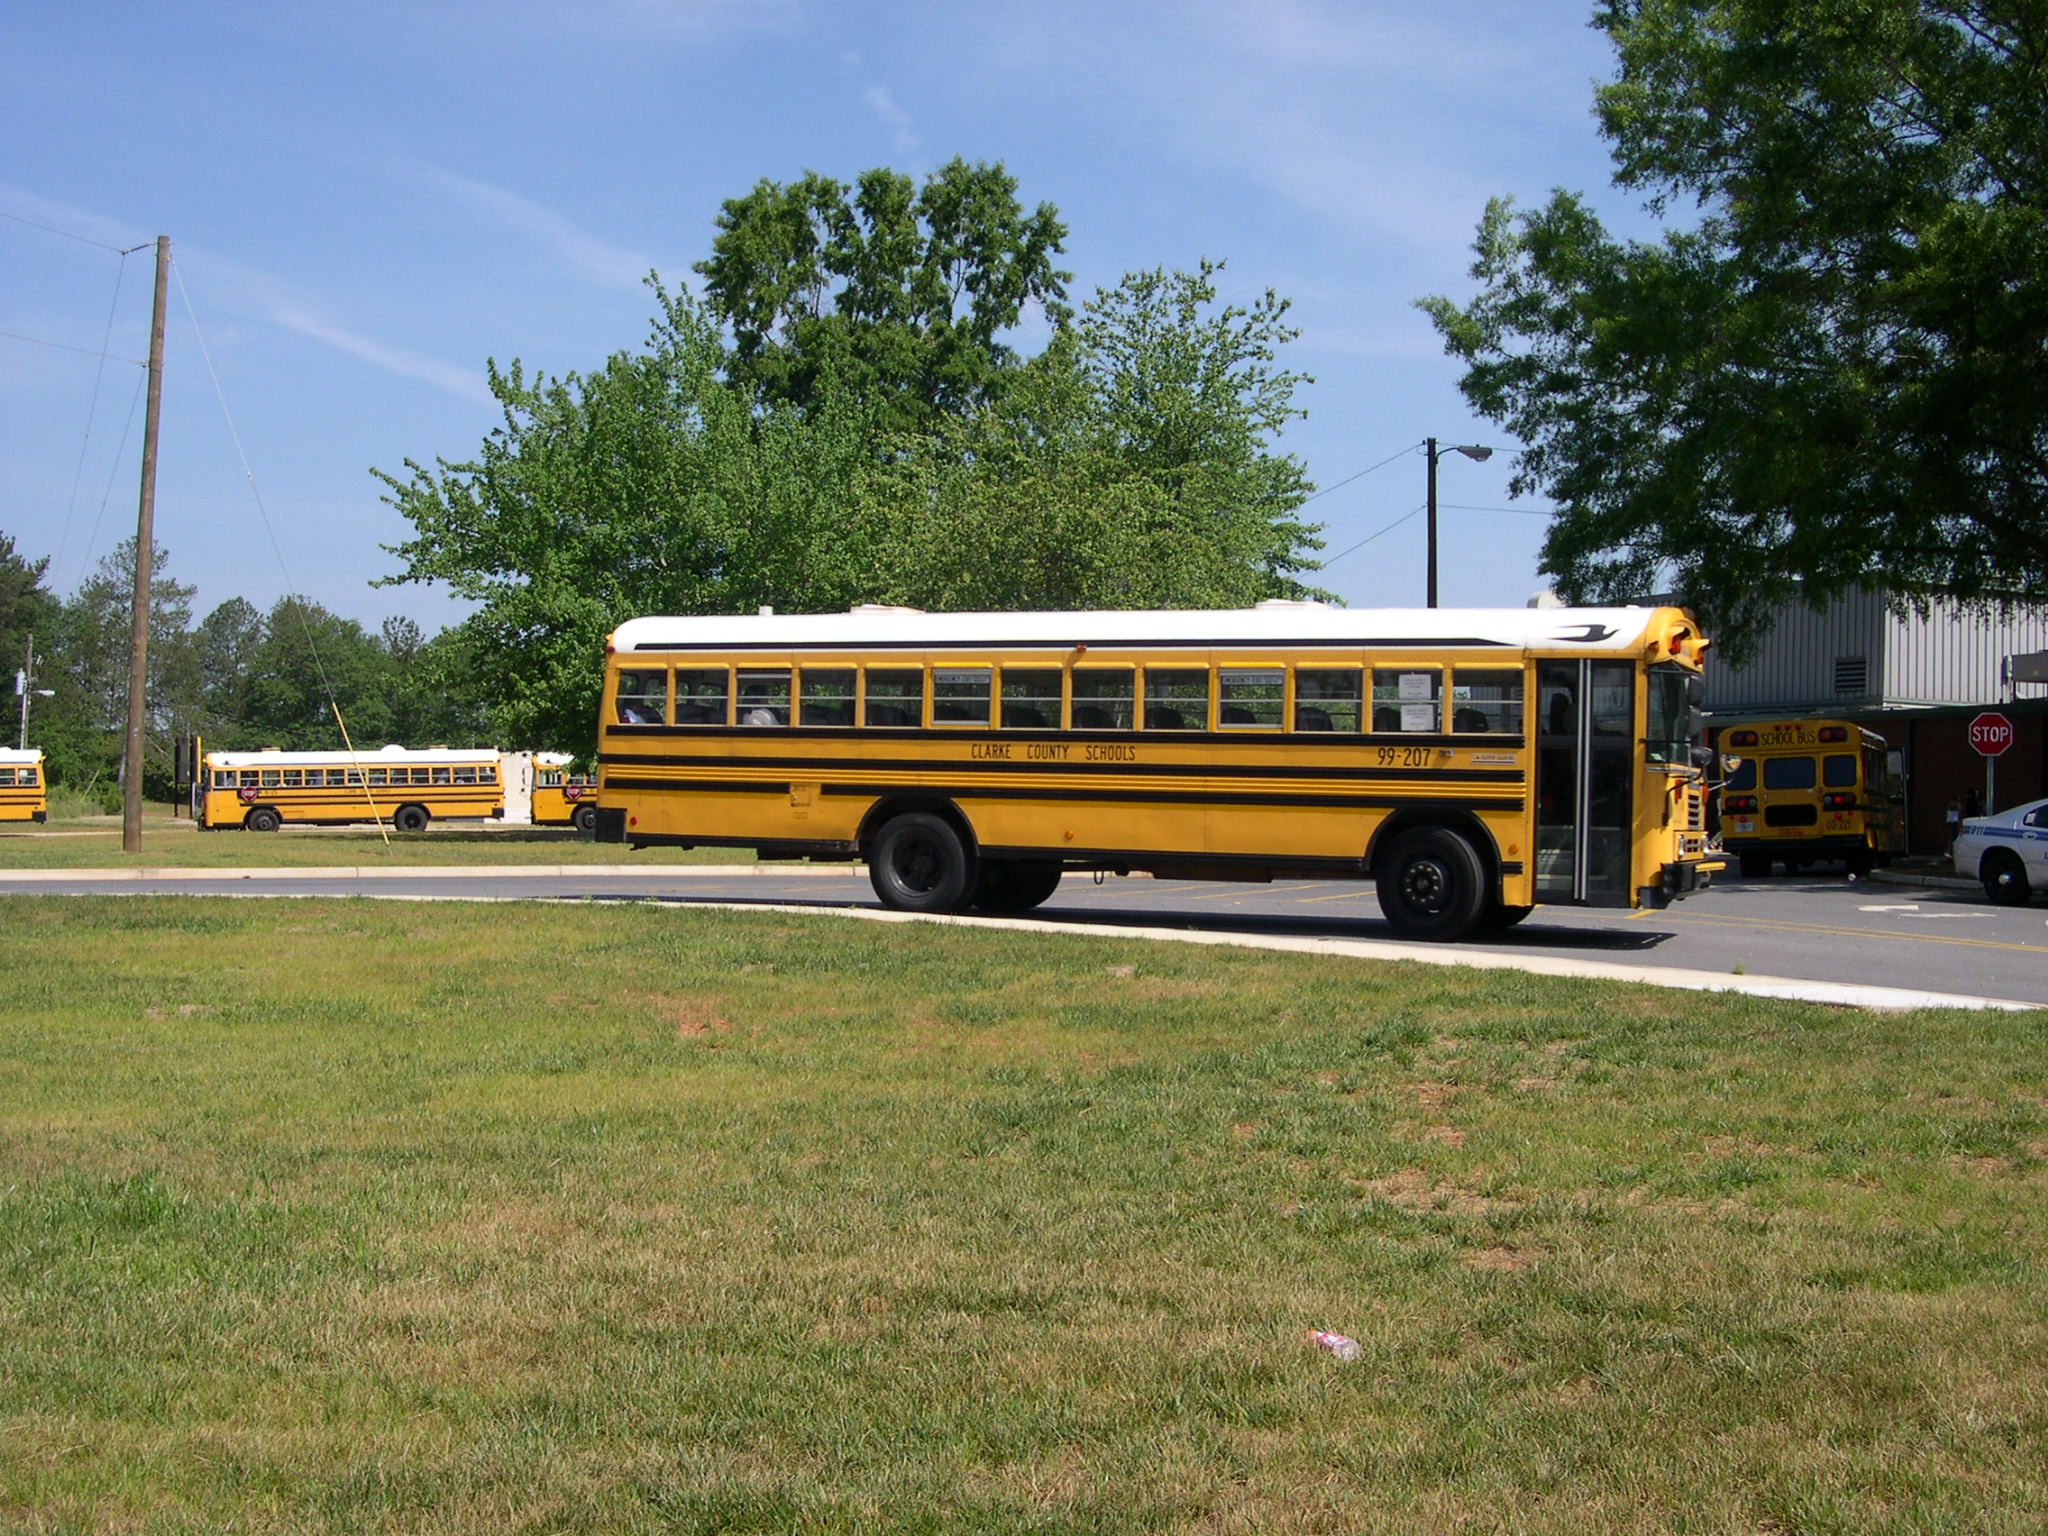 Student exchange in the USA - school bus in the USA